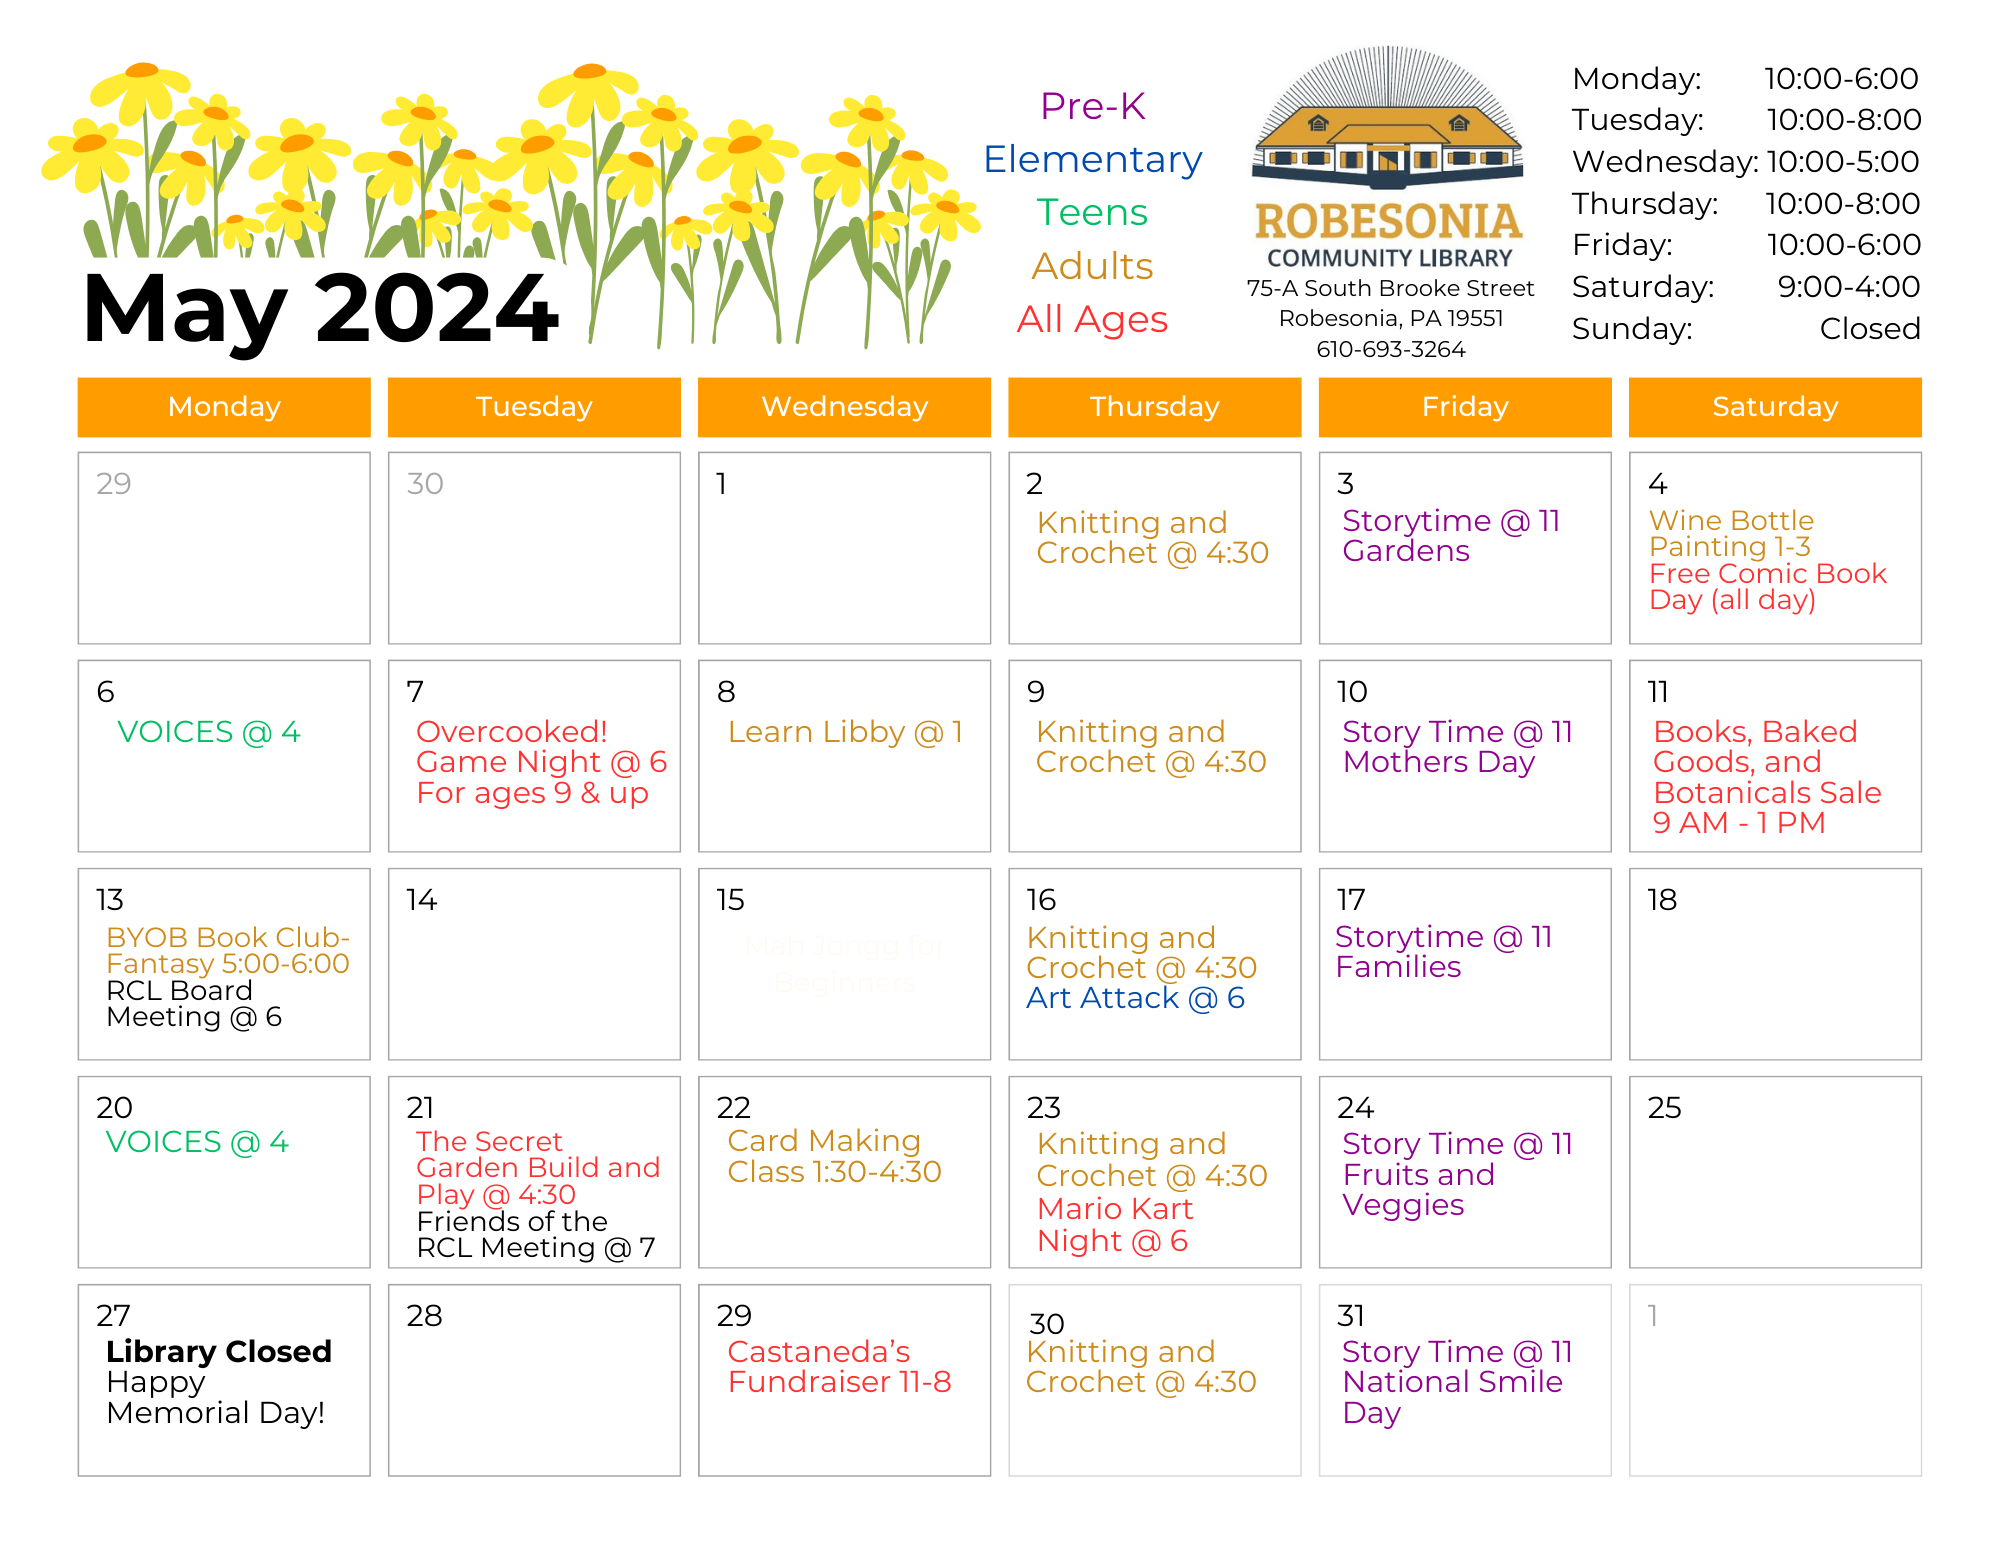 May's calendar of events